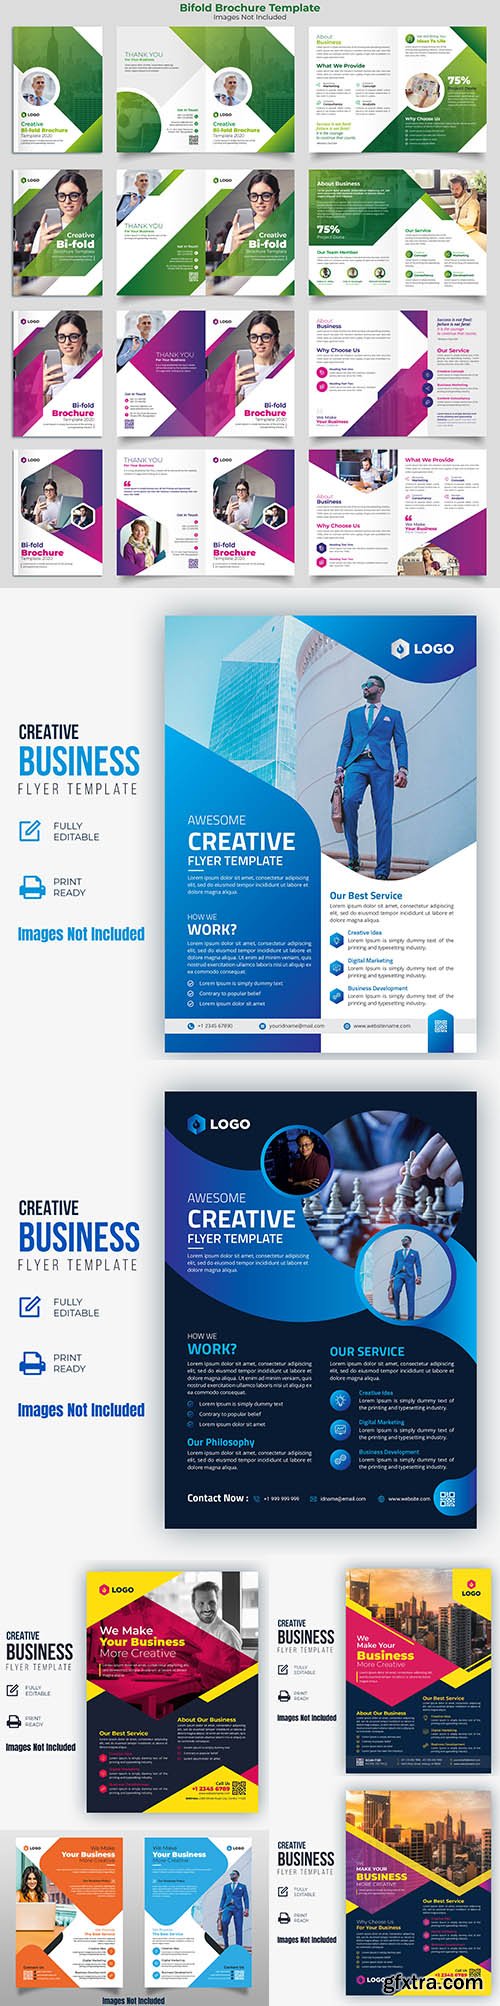 Bifold Brochure Template and Creative Business Flyer Vector Pack